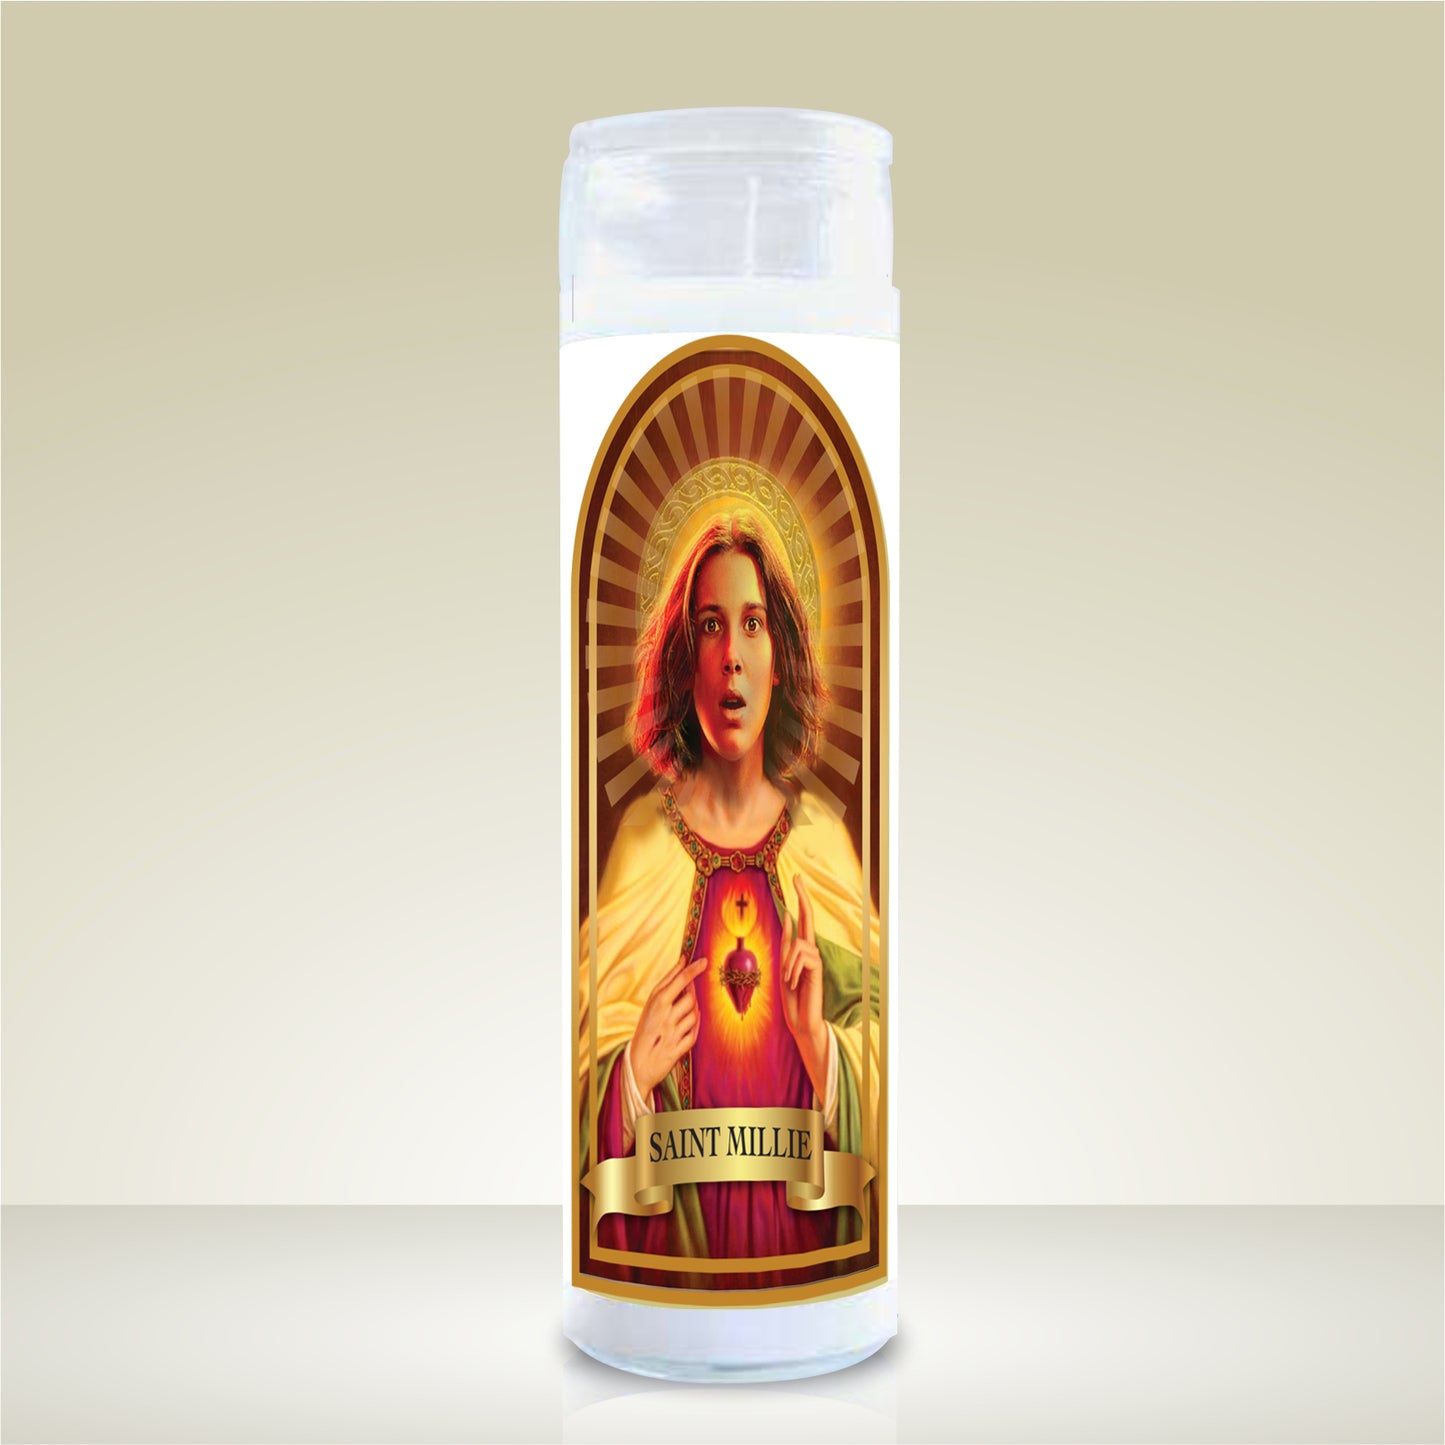 Millie Bobby Brown Celebrity Prayer Candle. Buy 1 Design, Get Another 1/2 Price